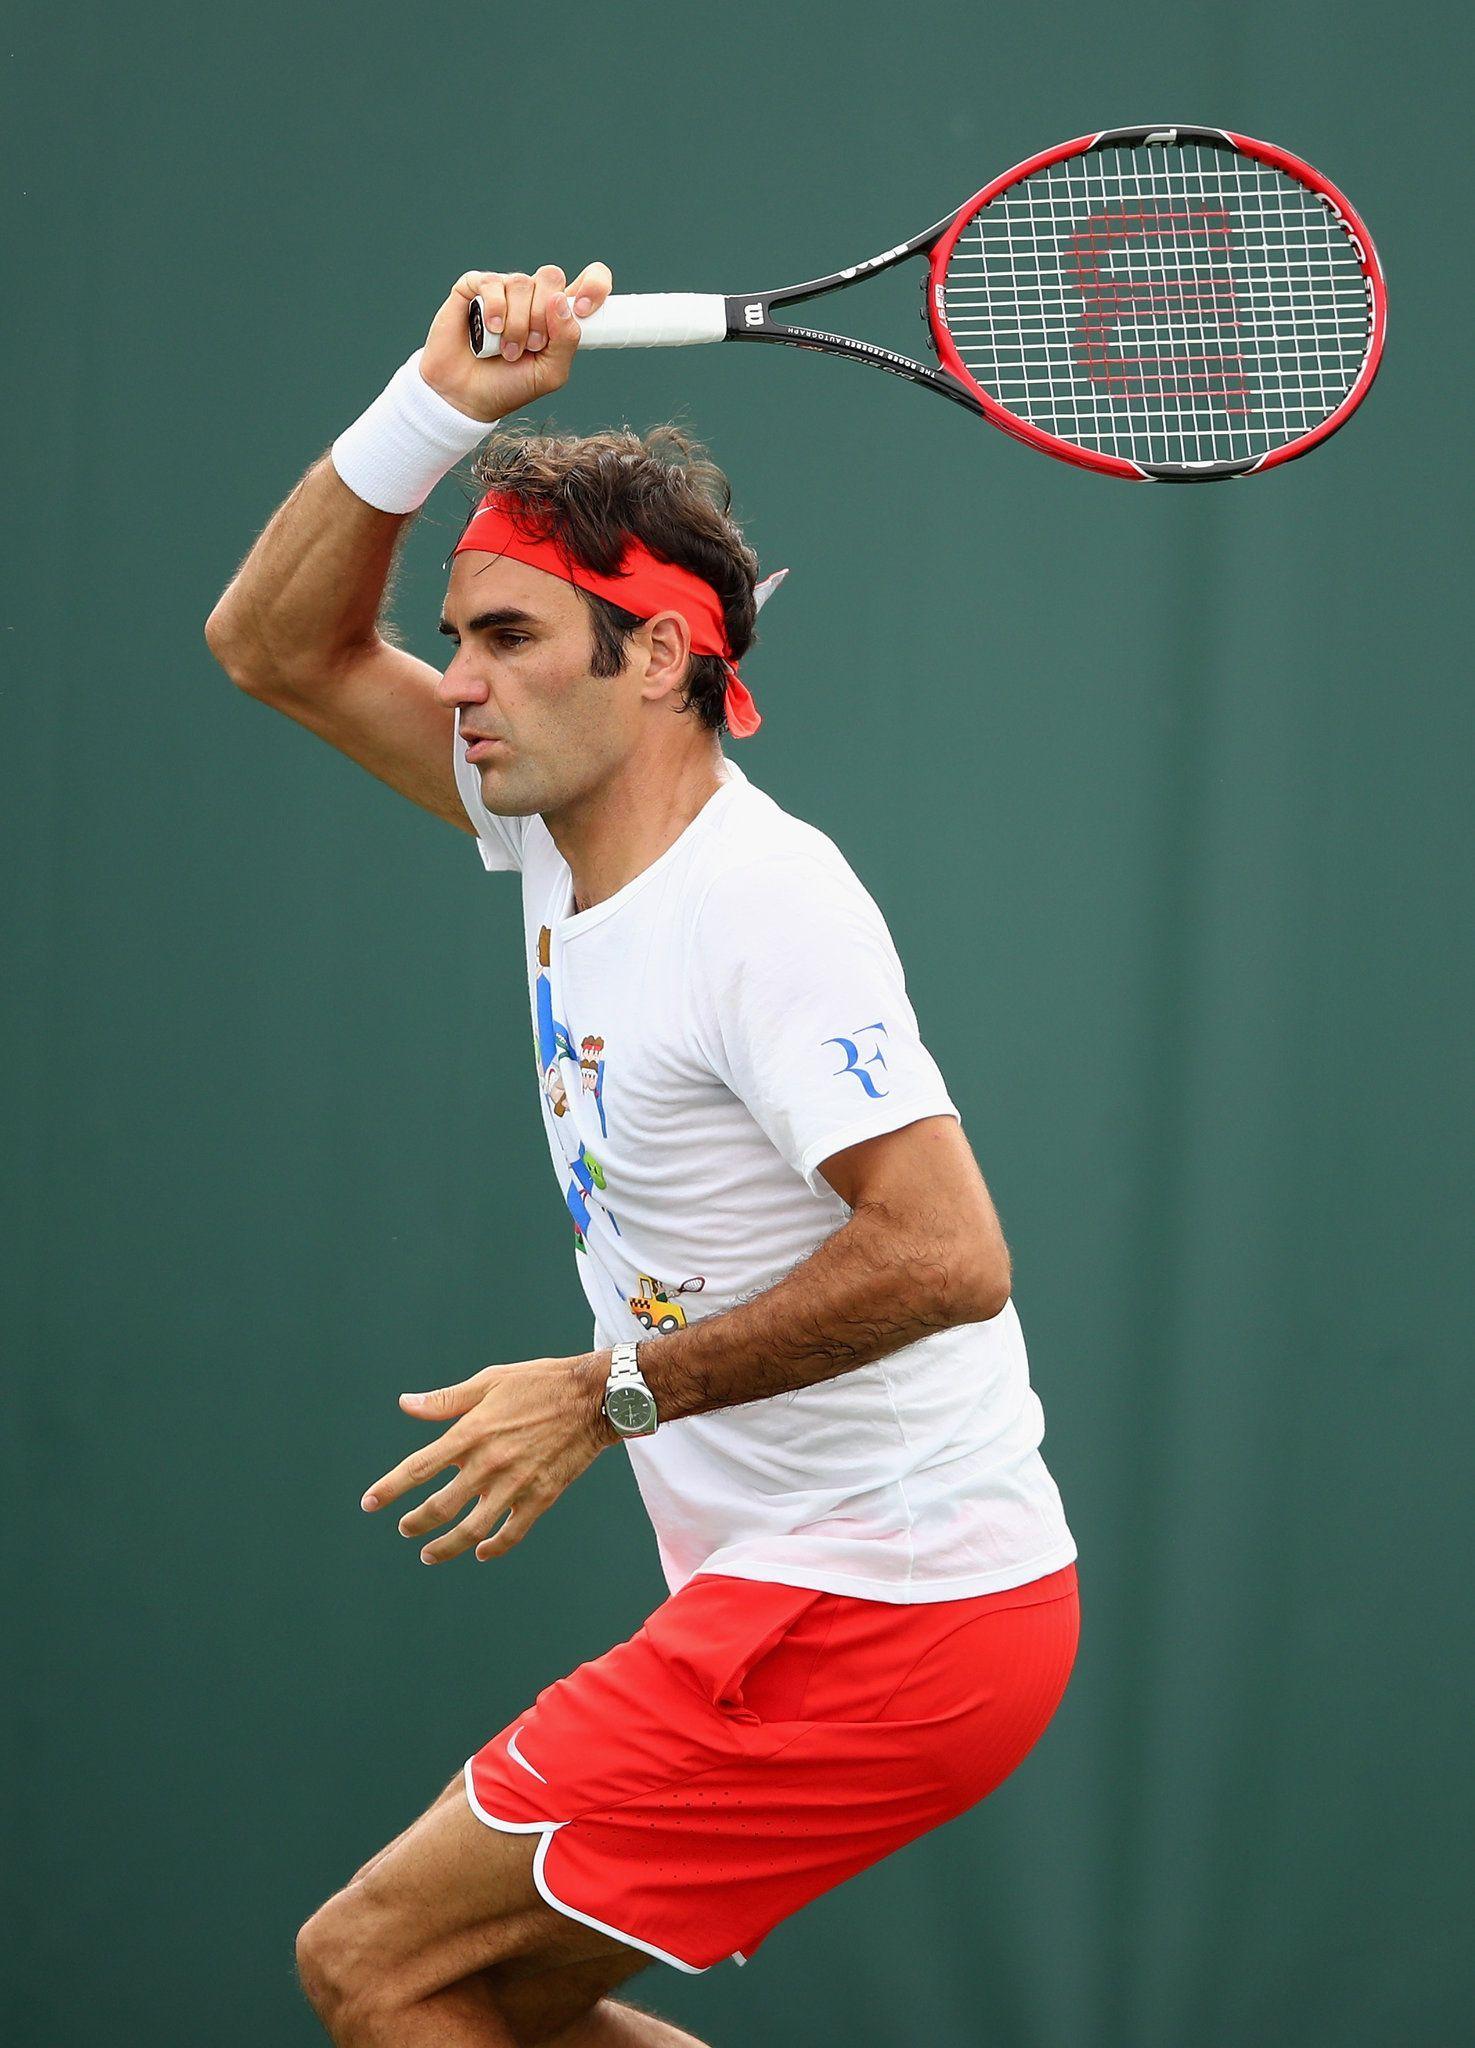 Roger Federer Wallpaper for iPhone iPhone 7 plus, iPhone 6 plus